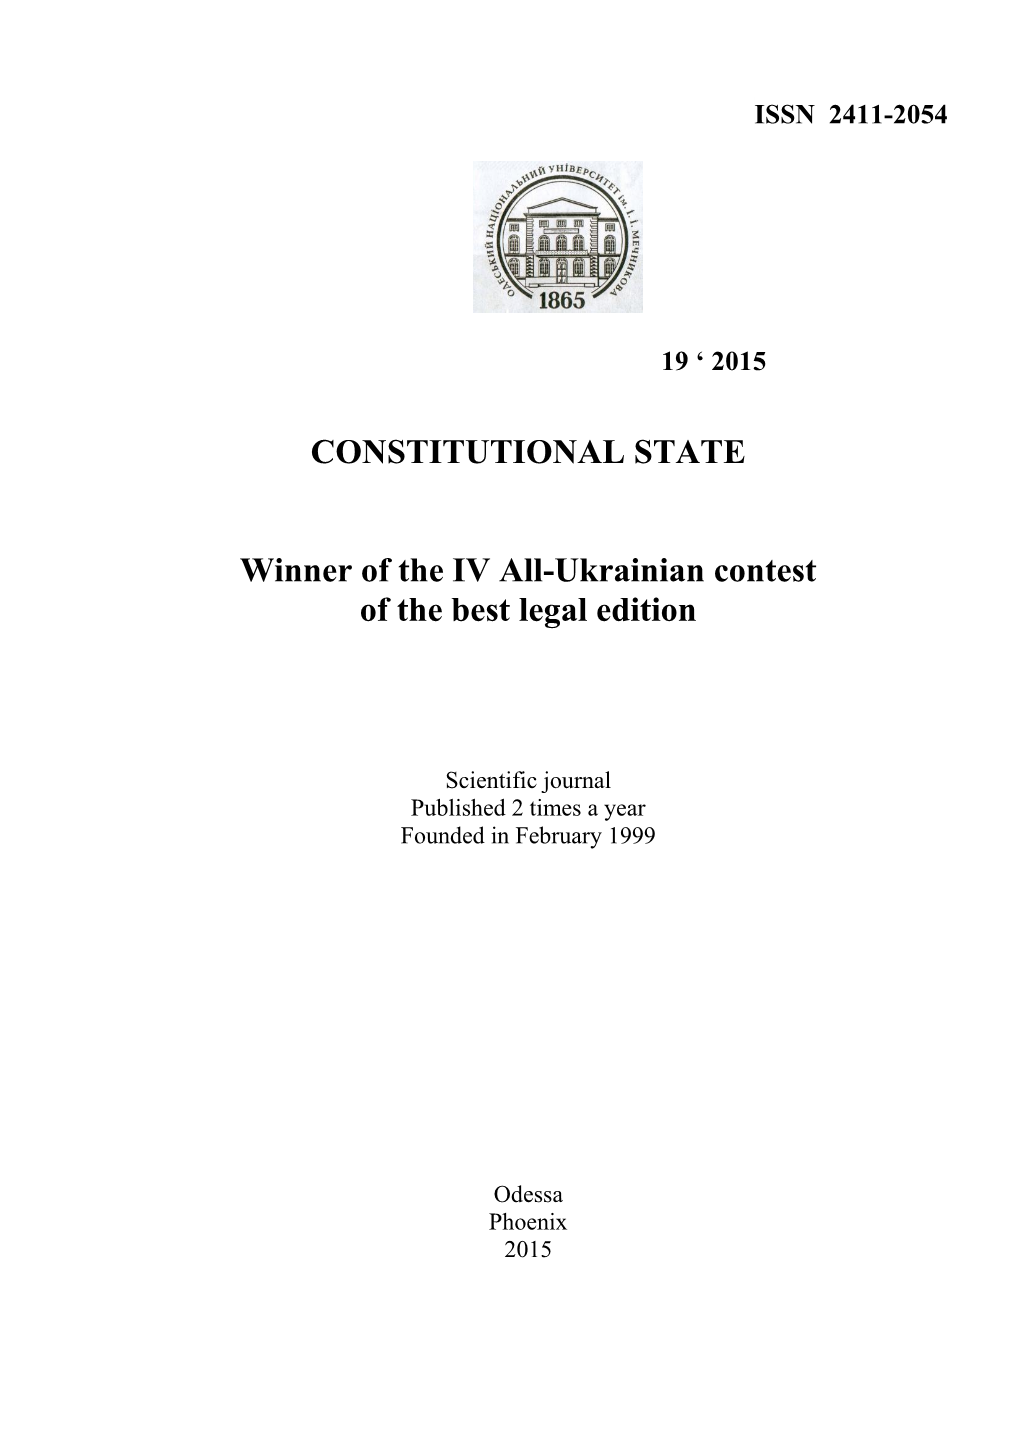 CONSTITUTIONAL STATE Winner of the IV All-Ukrainian Contest of The